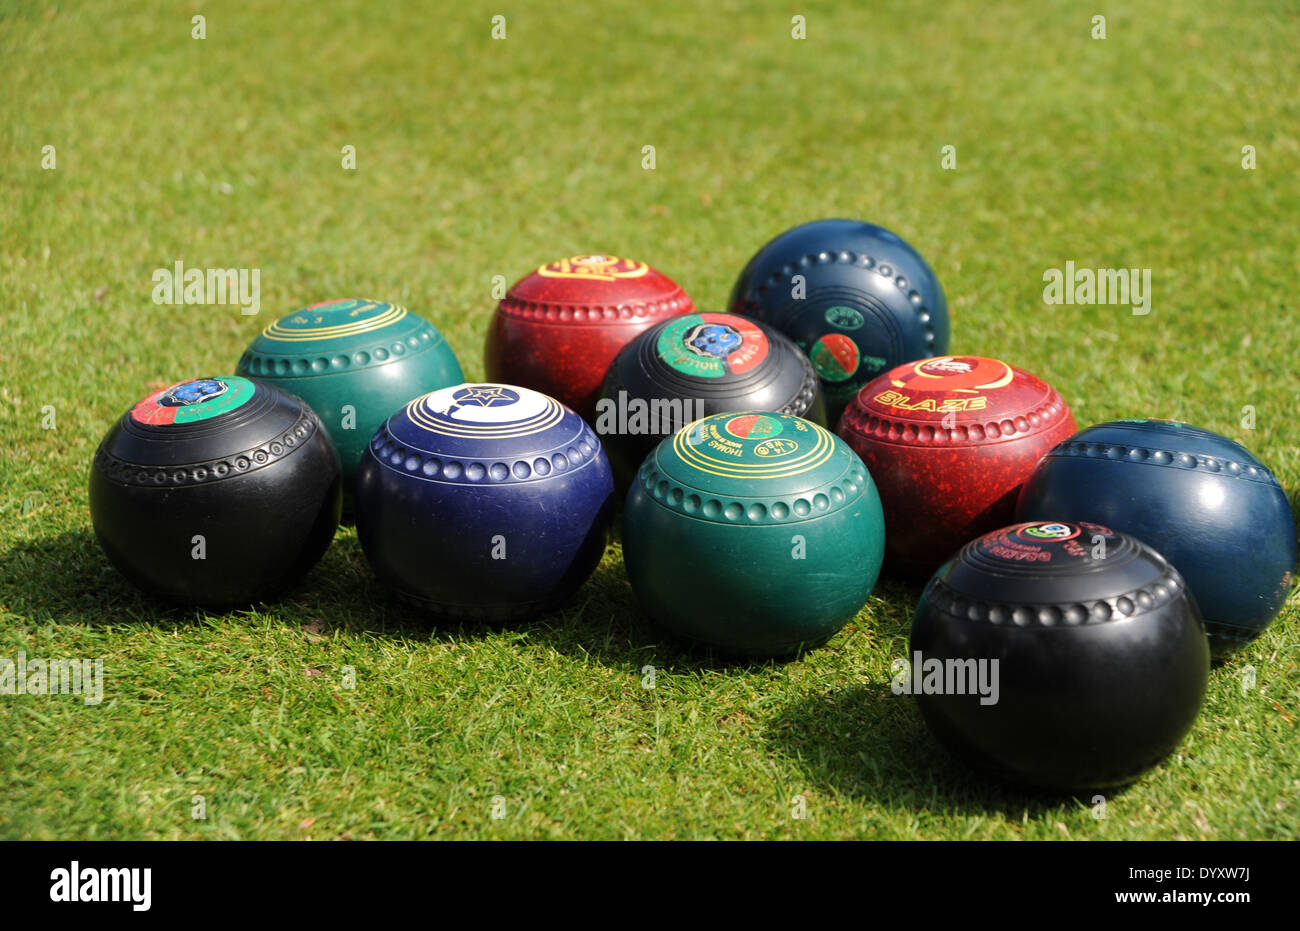 Bowling woods on grass summer game UK Stock Photo